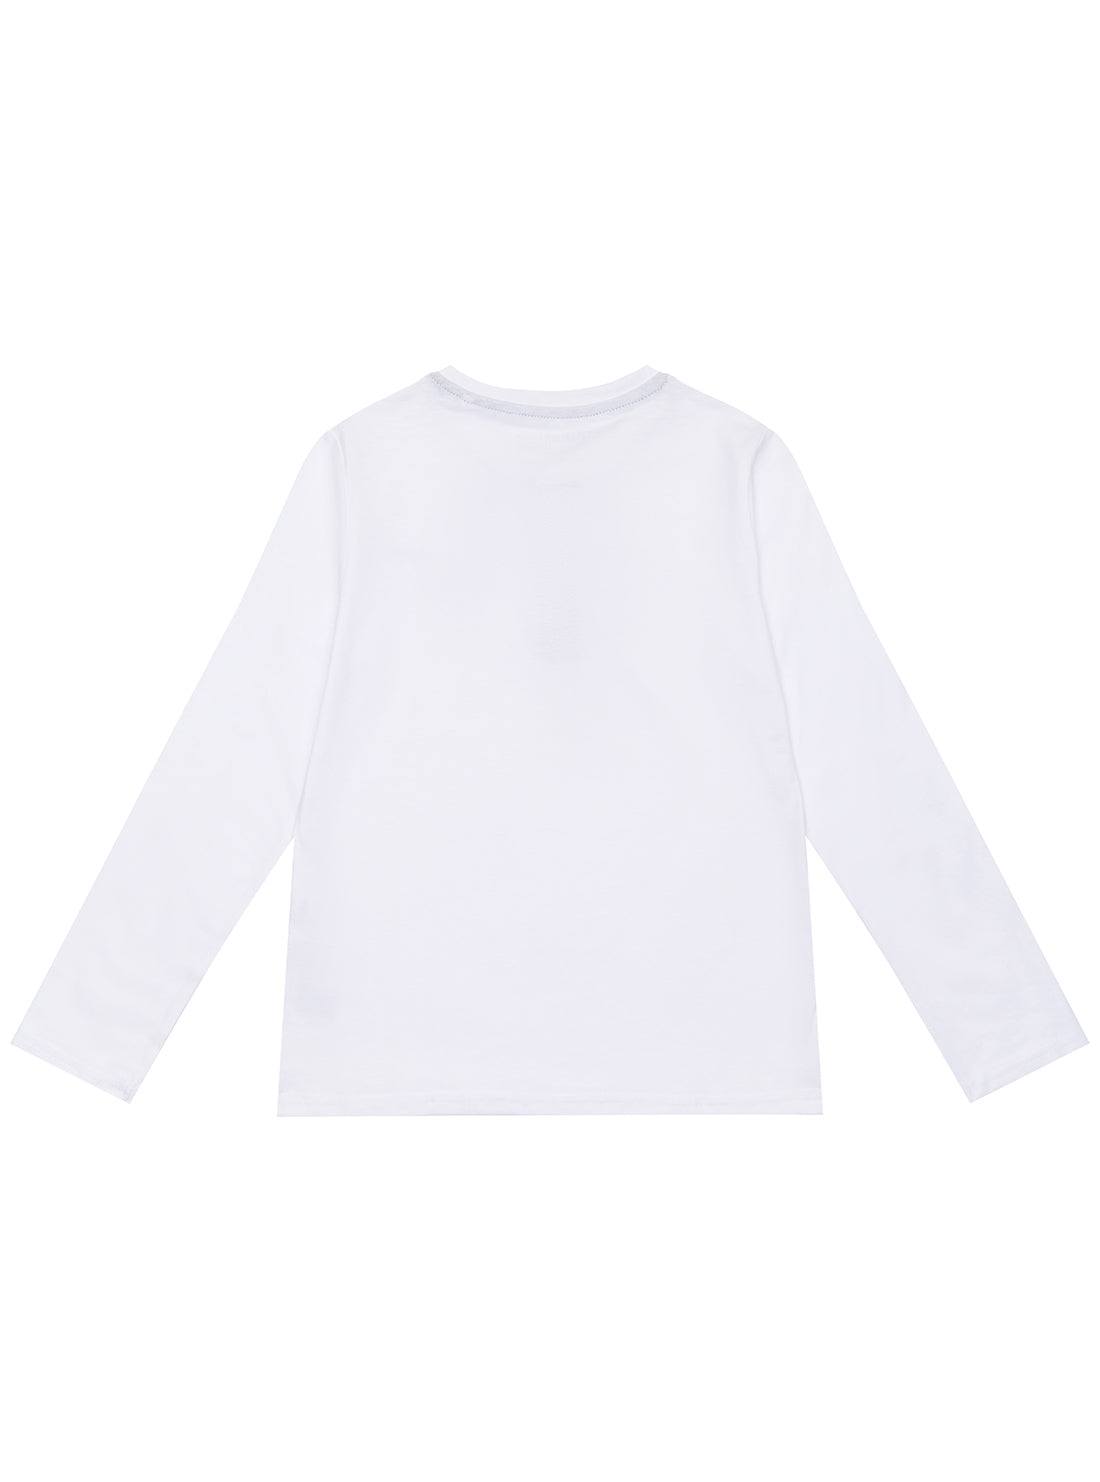 GUESS White Henley Long Sleeves T-Shirt back view